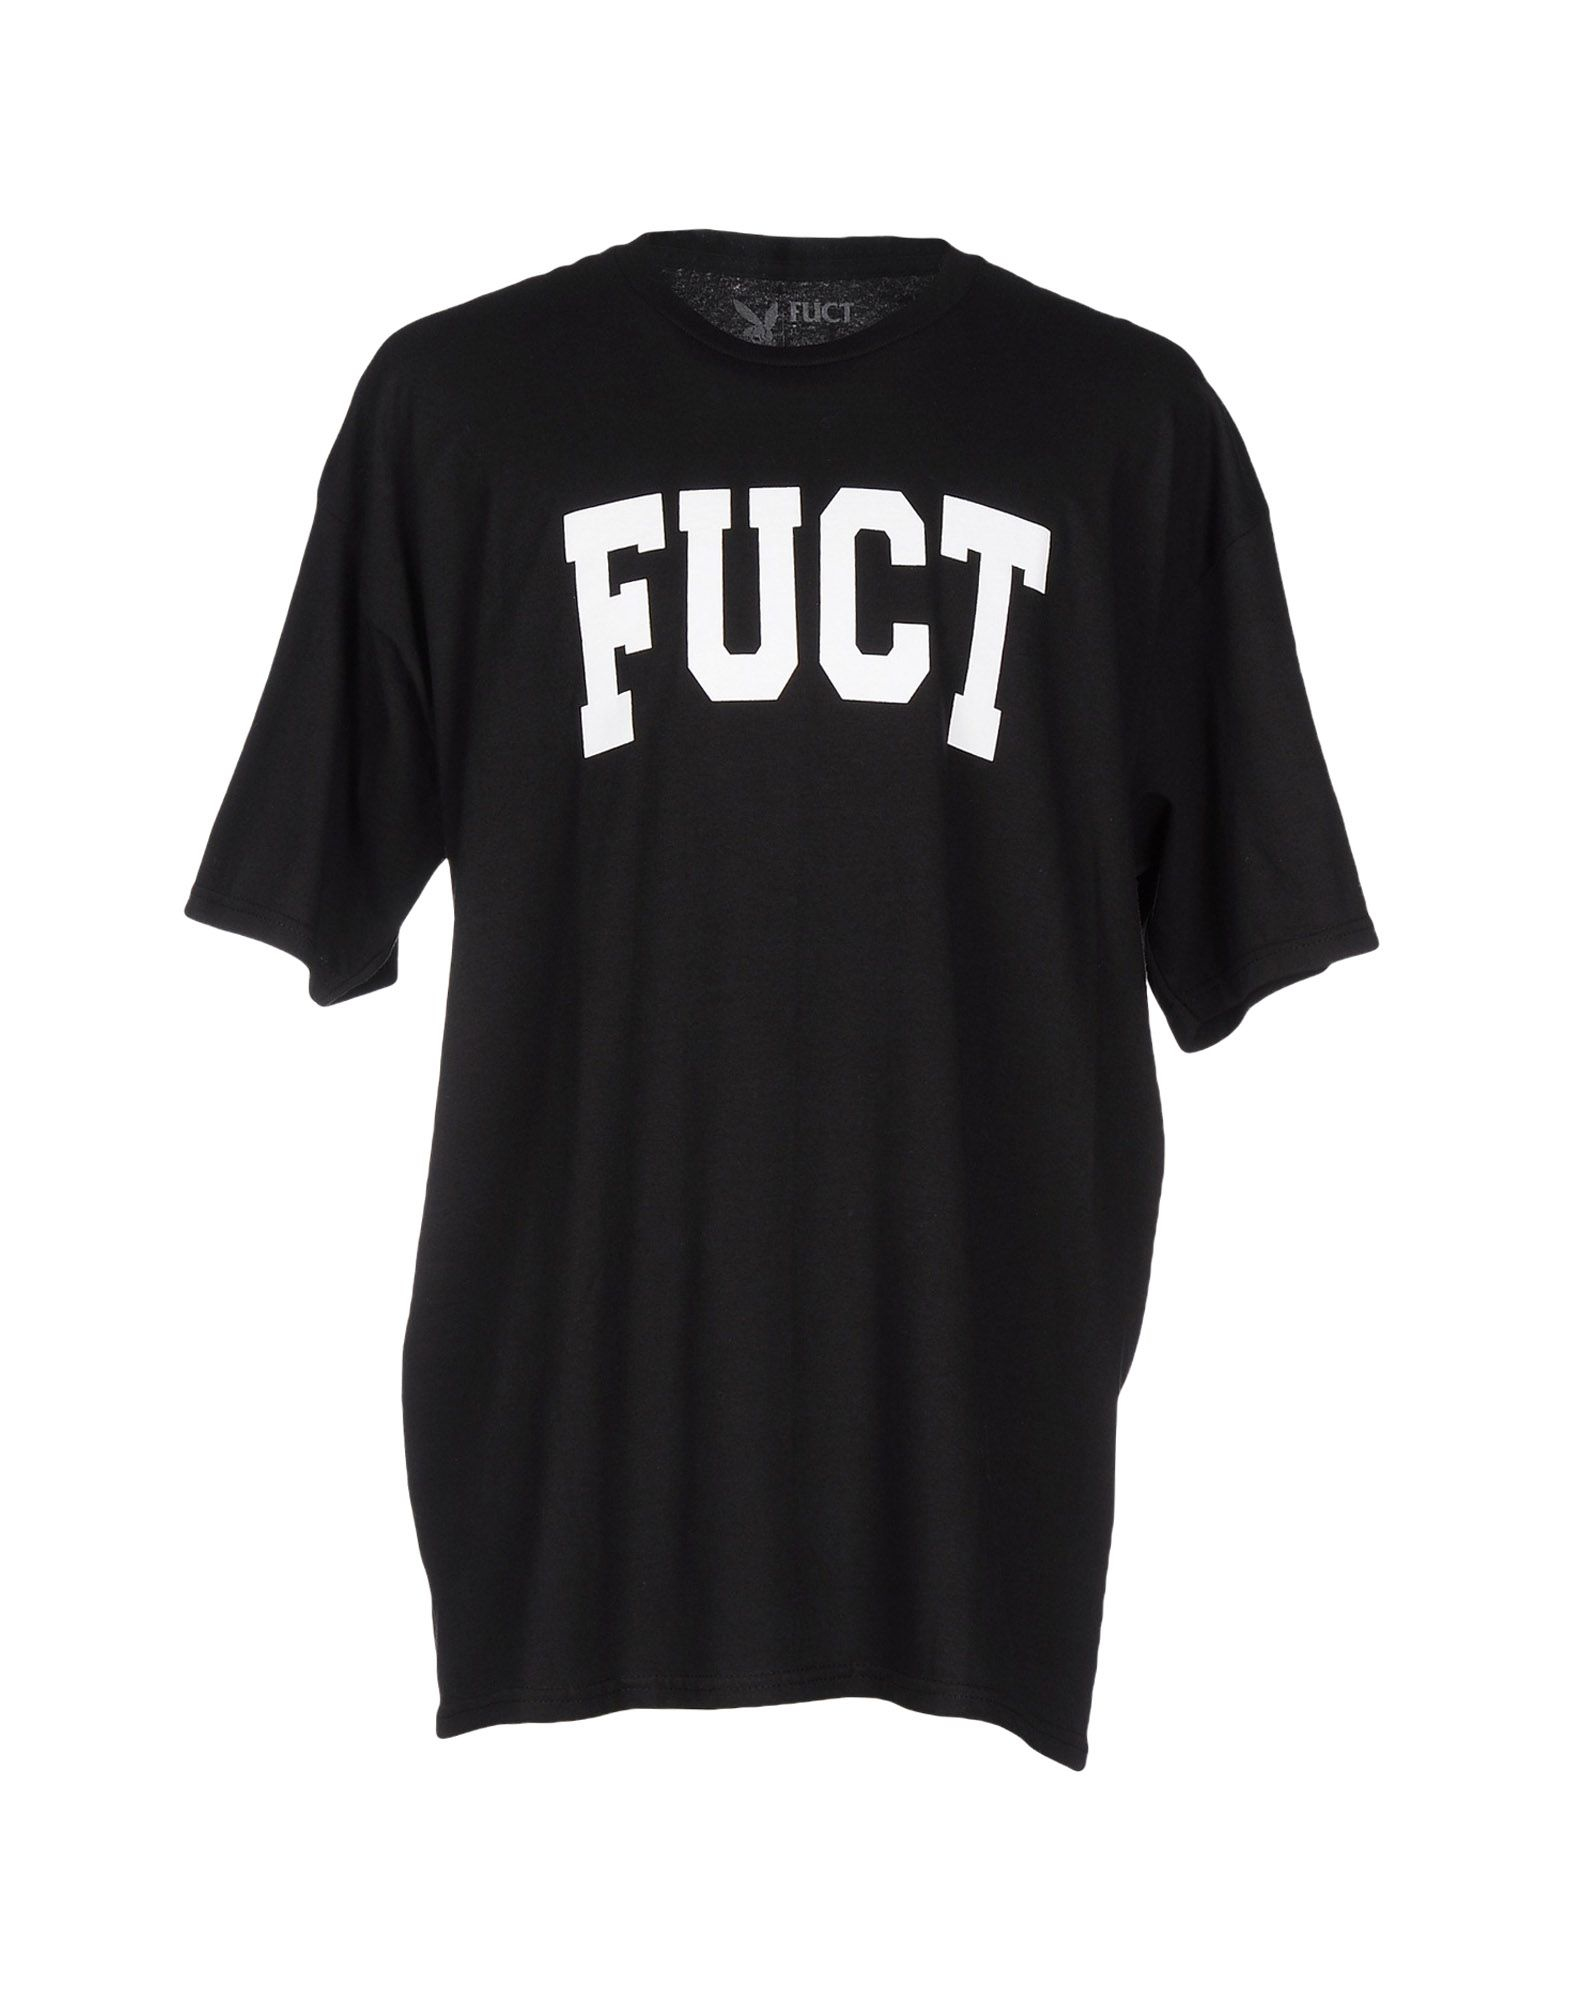 Lyst - Fuct T-shirt in Black for Men